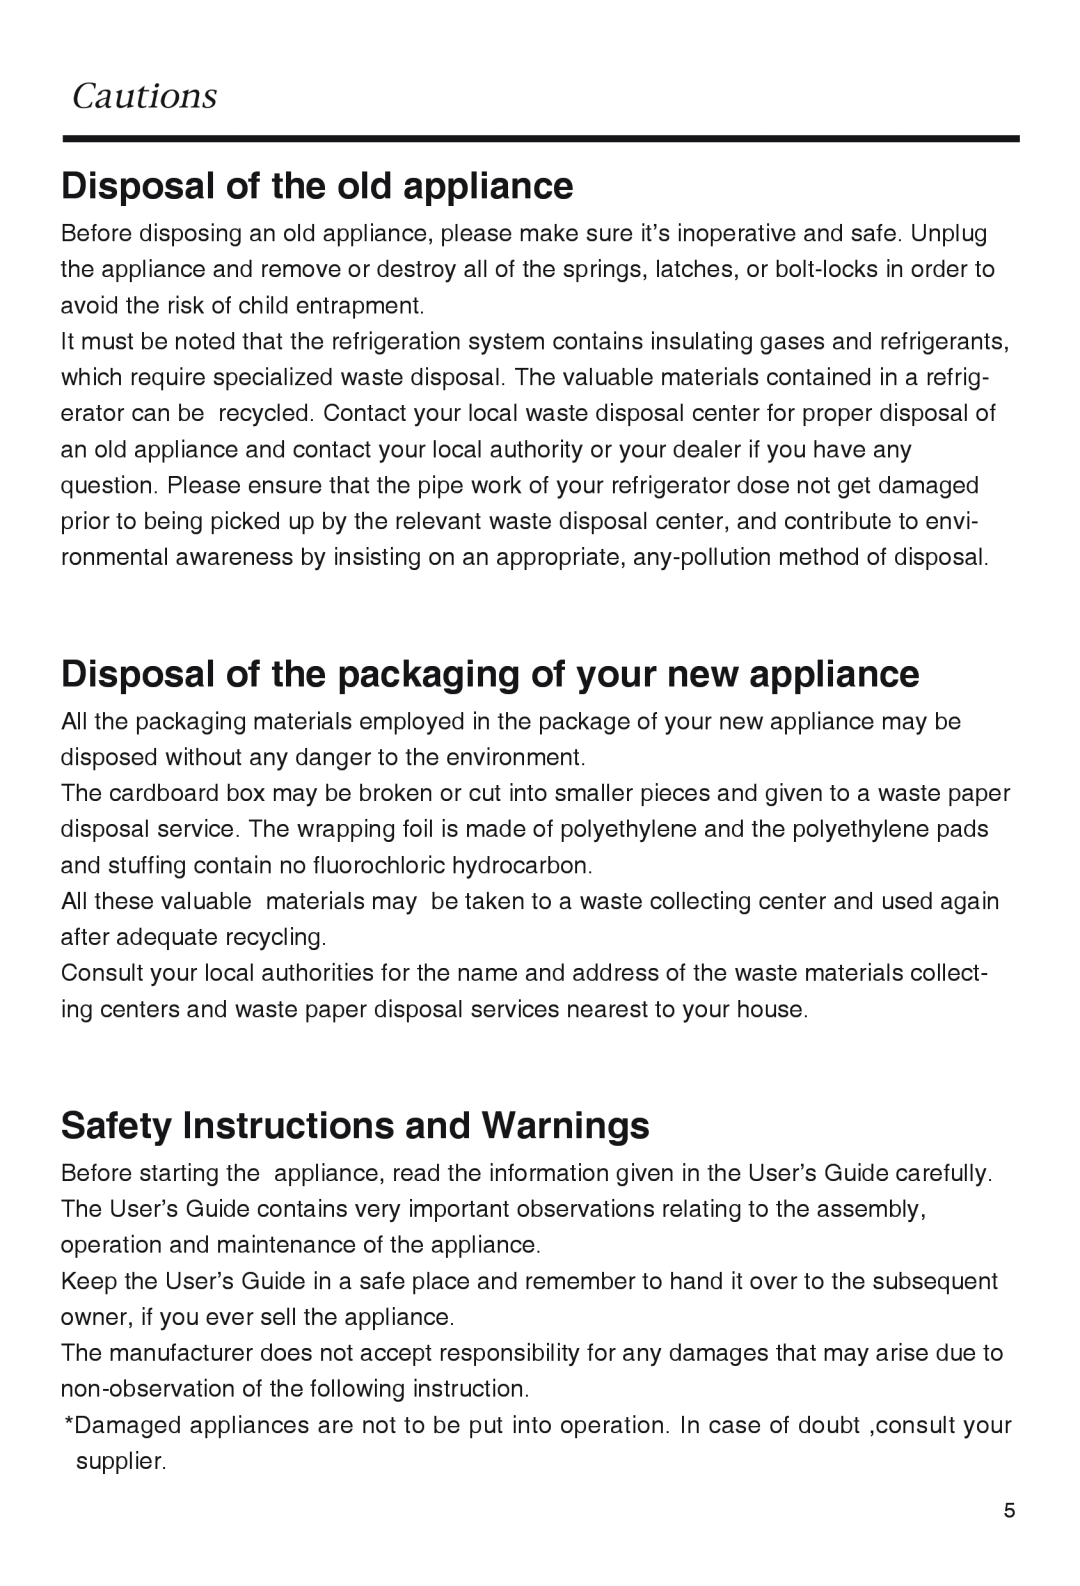 Haier UN-FZBU110 manual Disposal of the old appliance, Disposal of the packaging of your new appliance, Cautions 